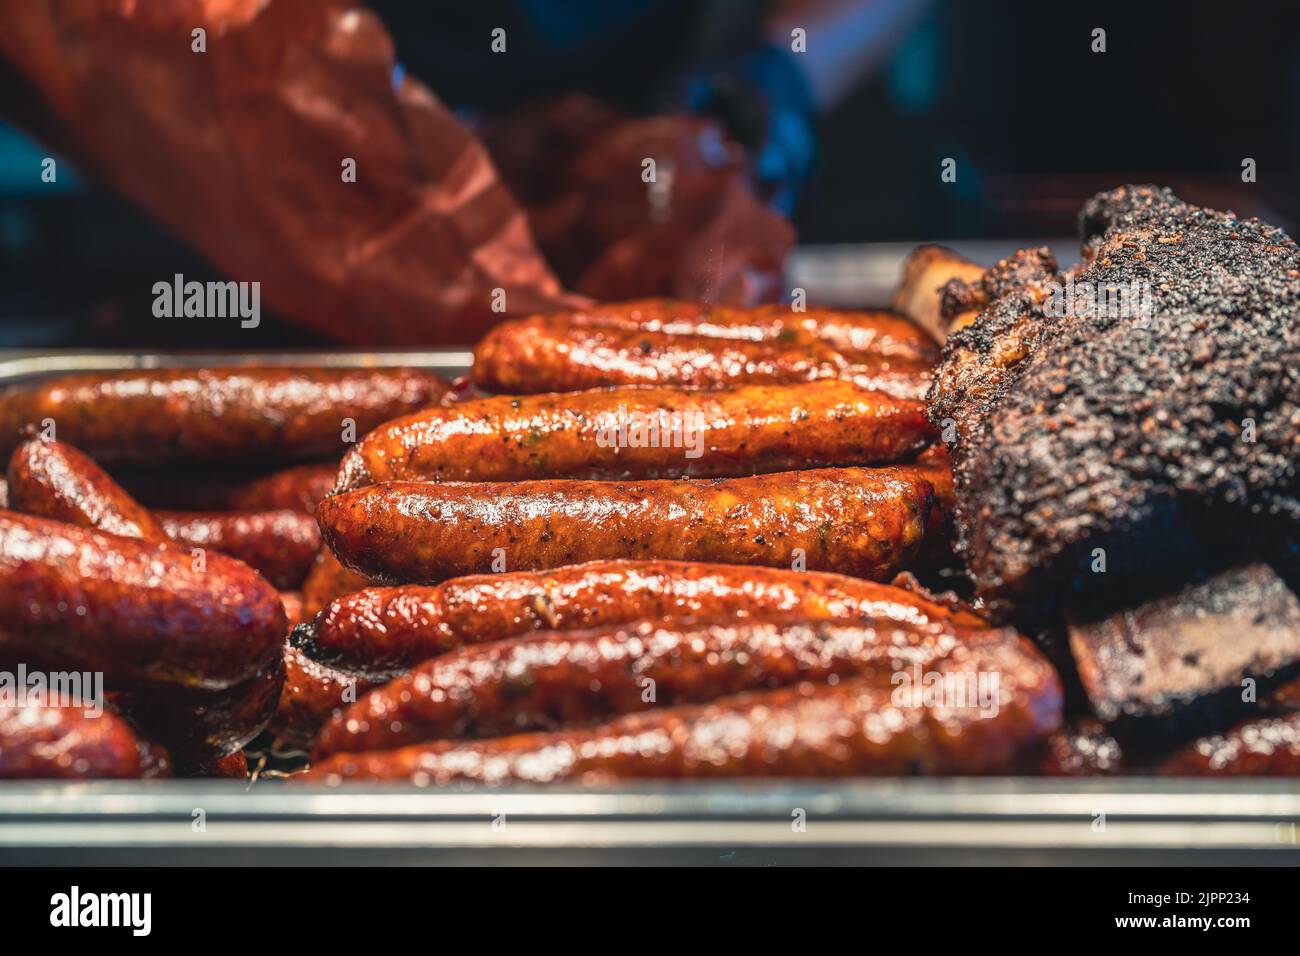 Delicious Texan Barbecue Spicy Sausages and Brisket. Stock Photo